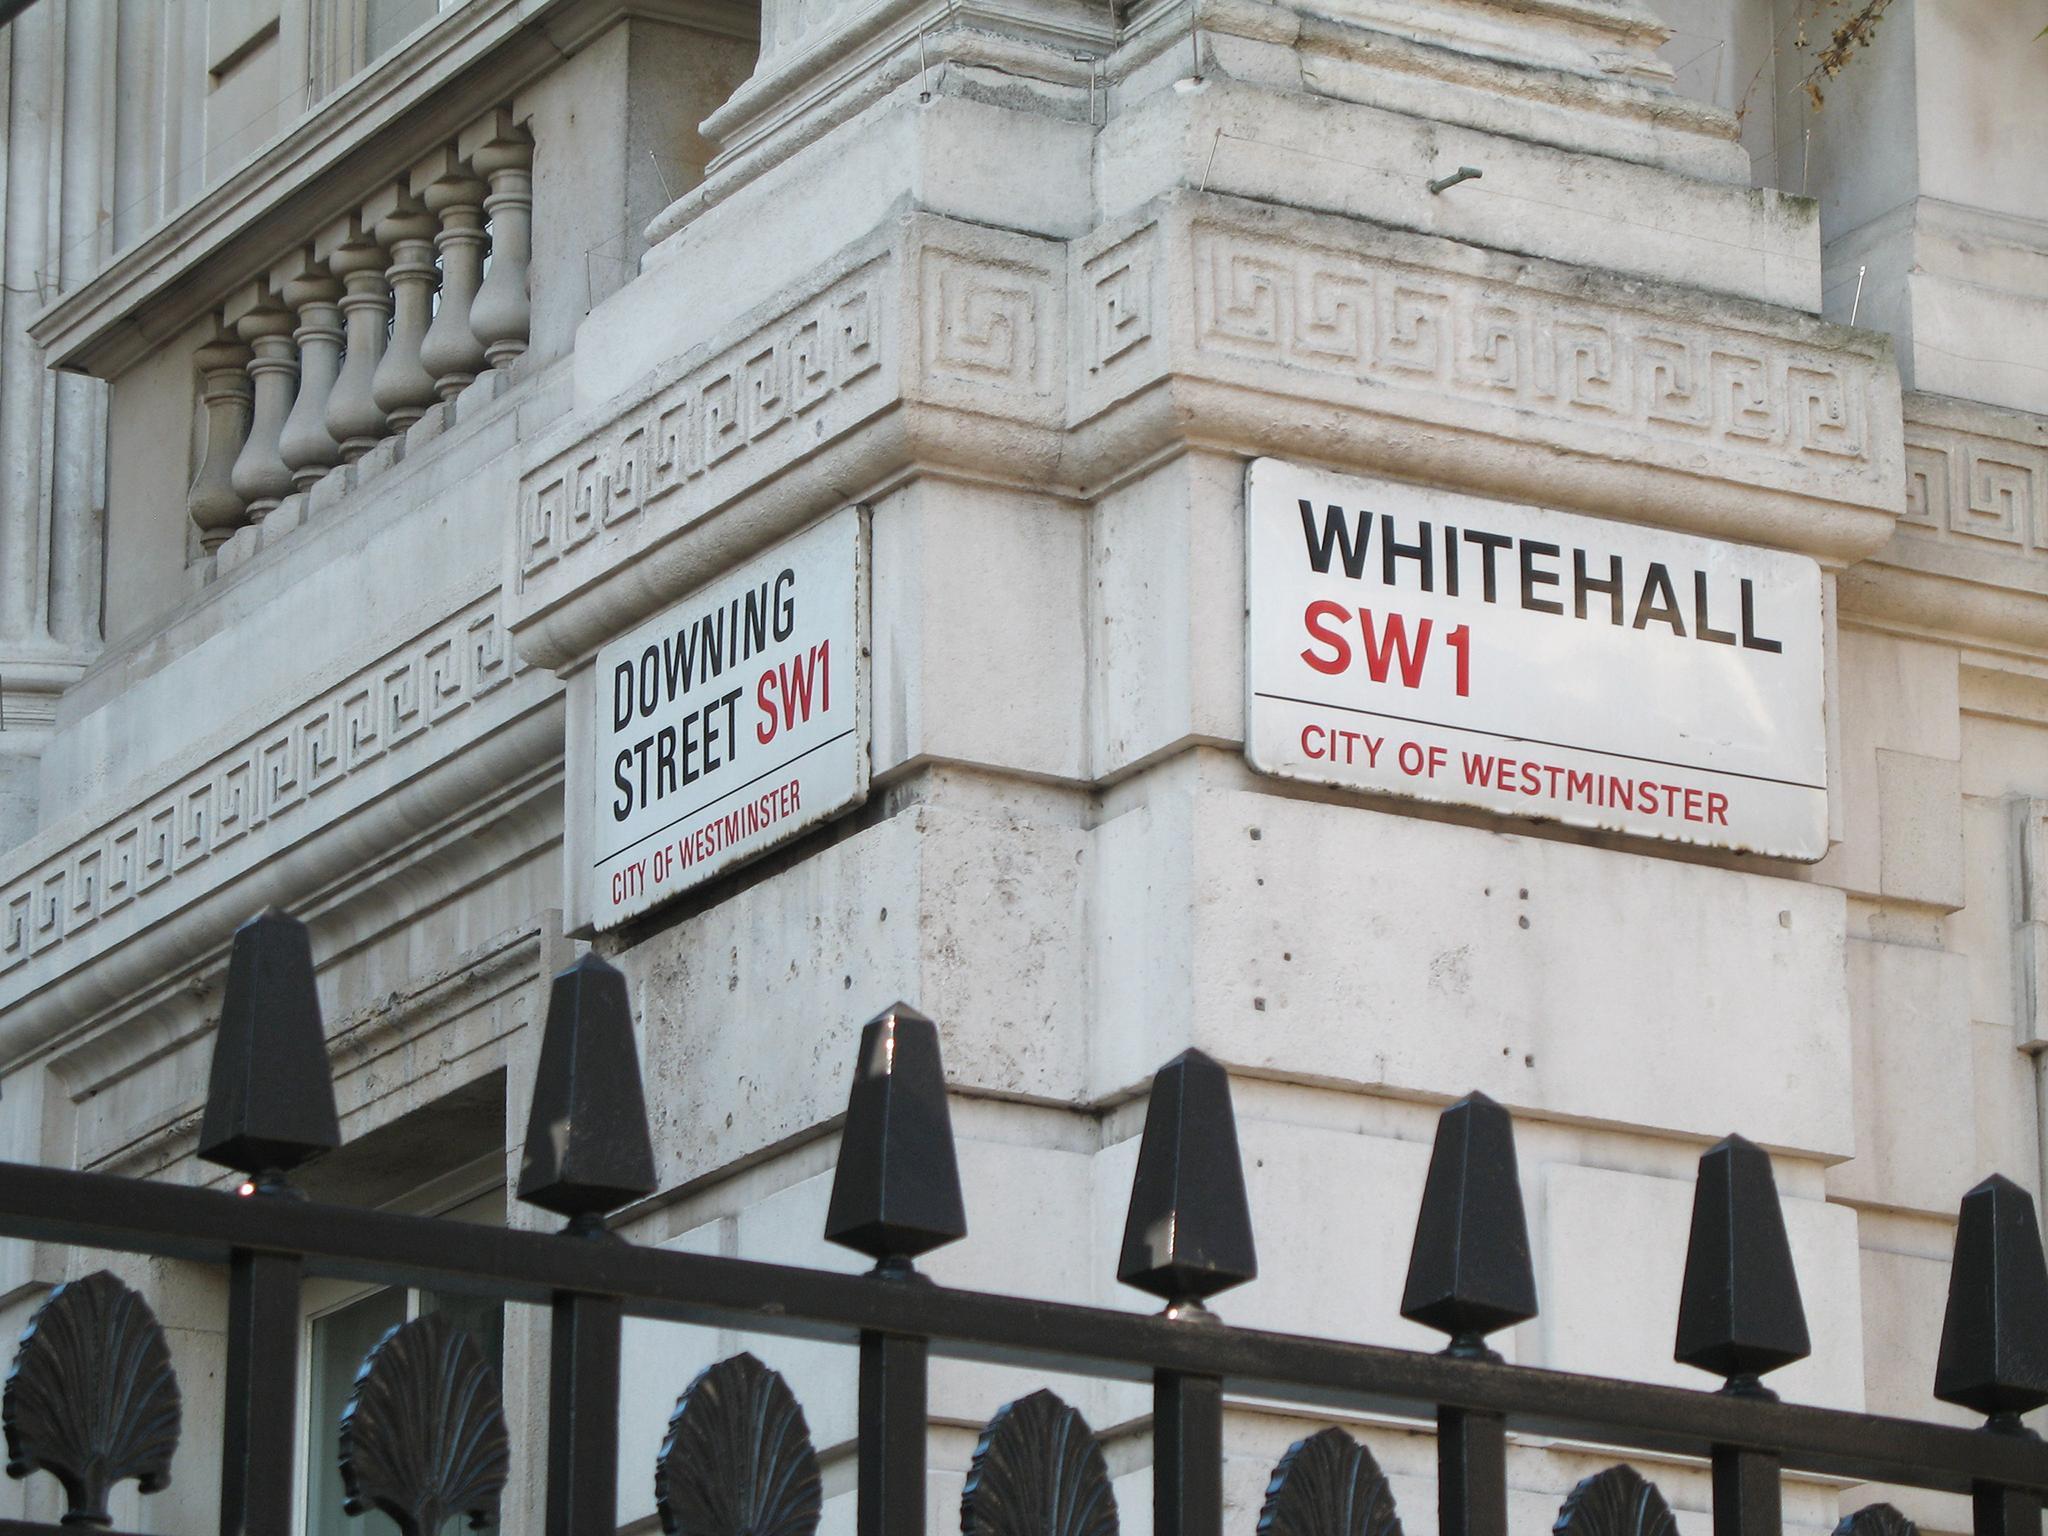 Whitehall was one of the targets of the foiled Fancy Bears attack